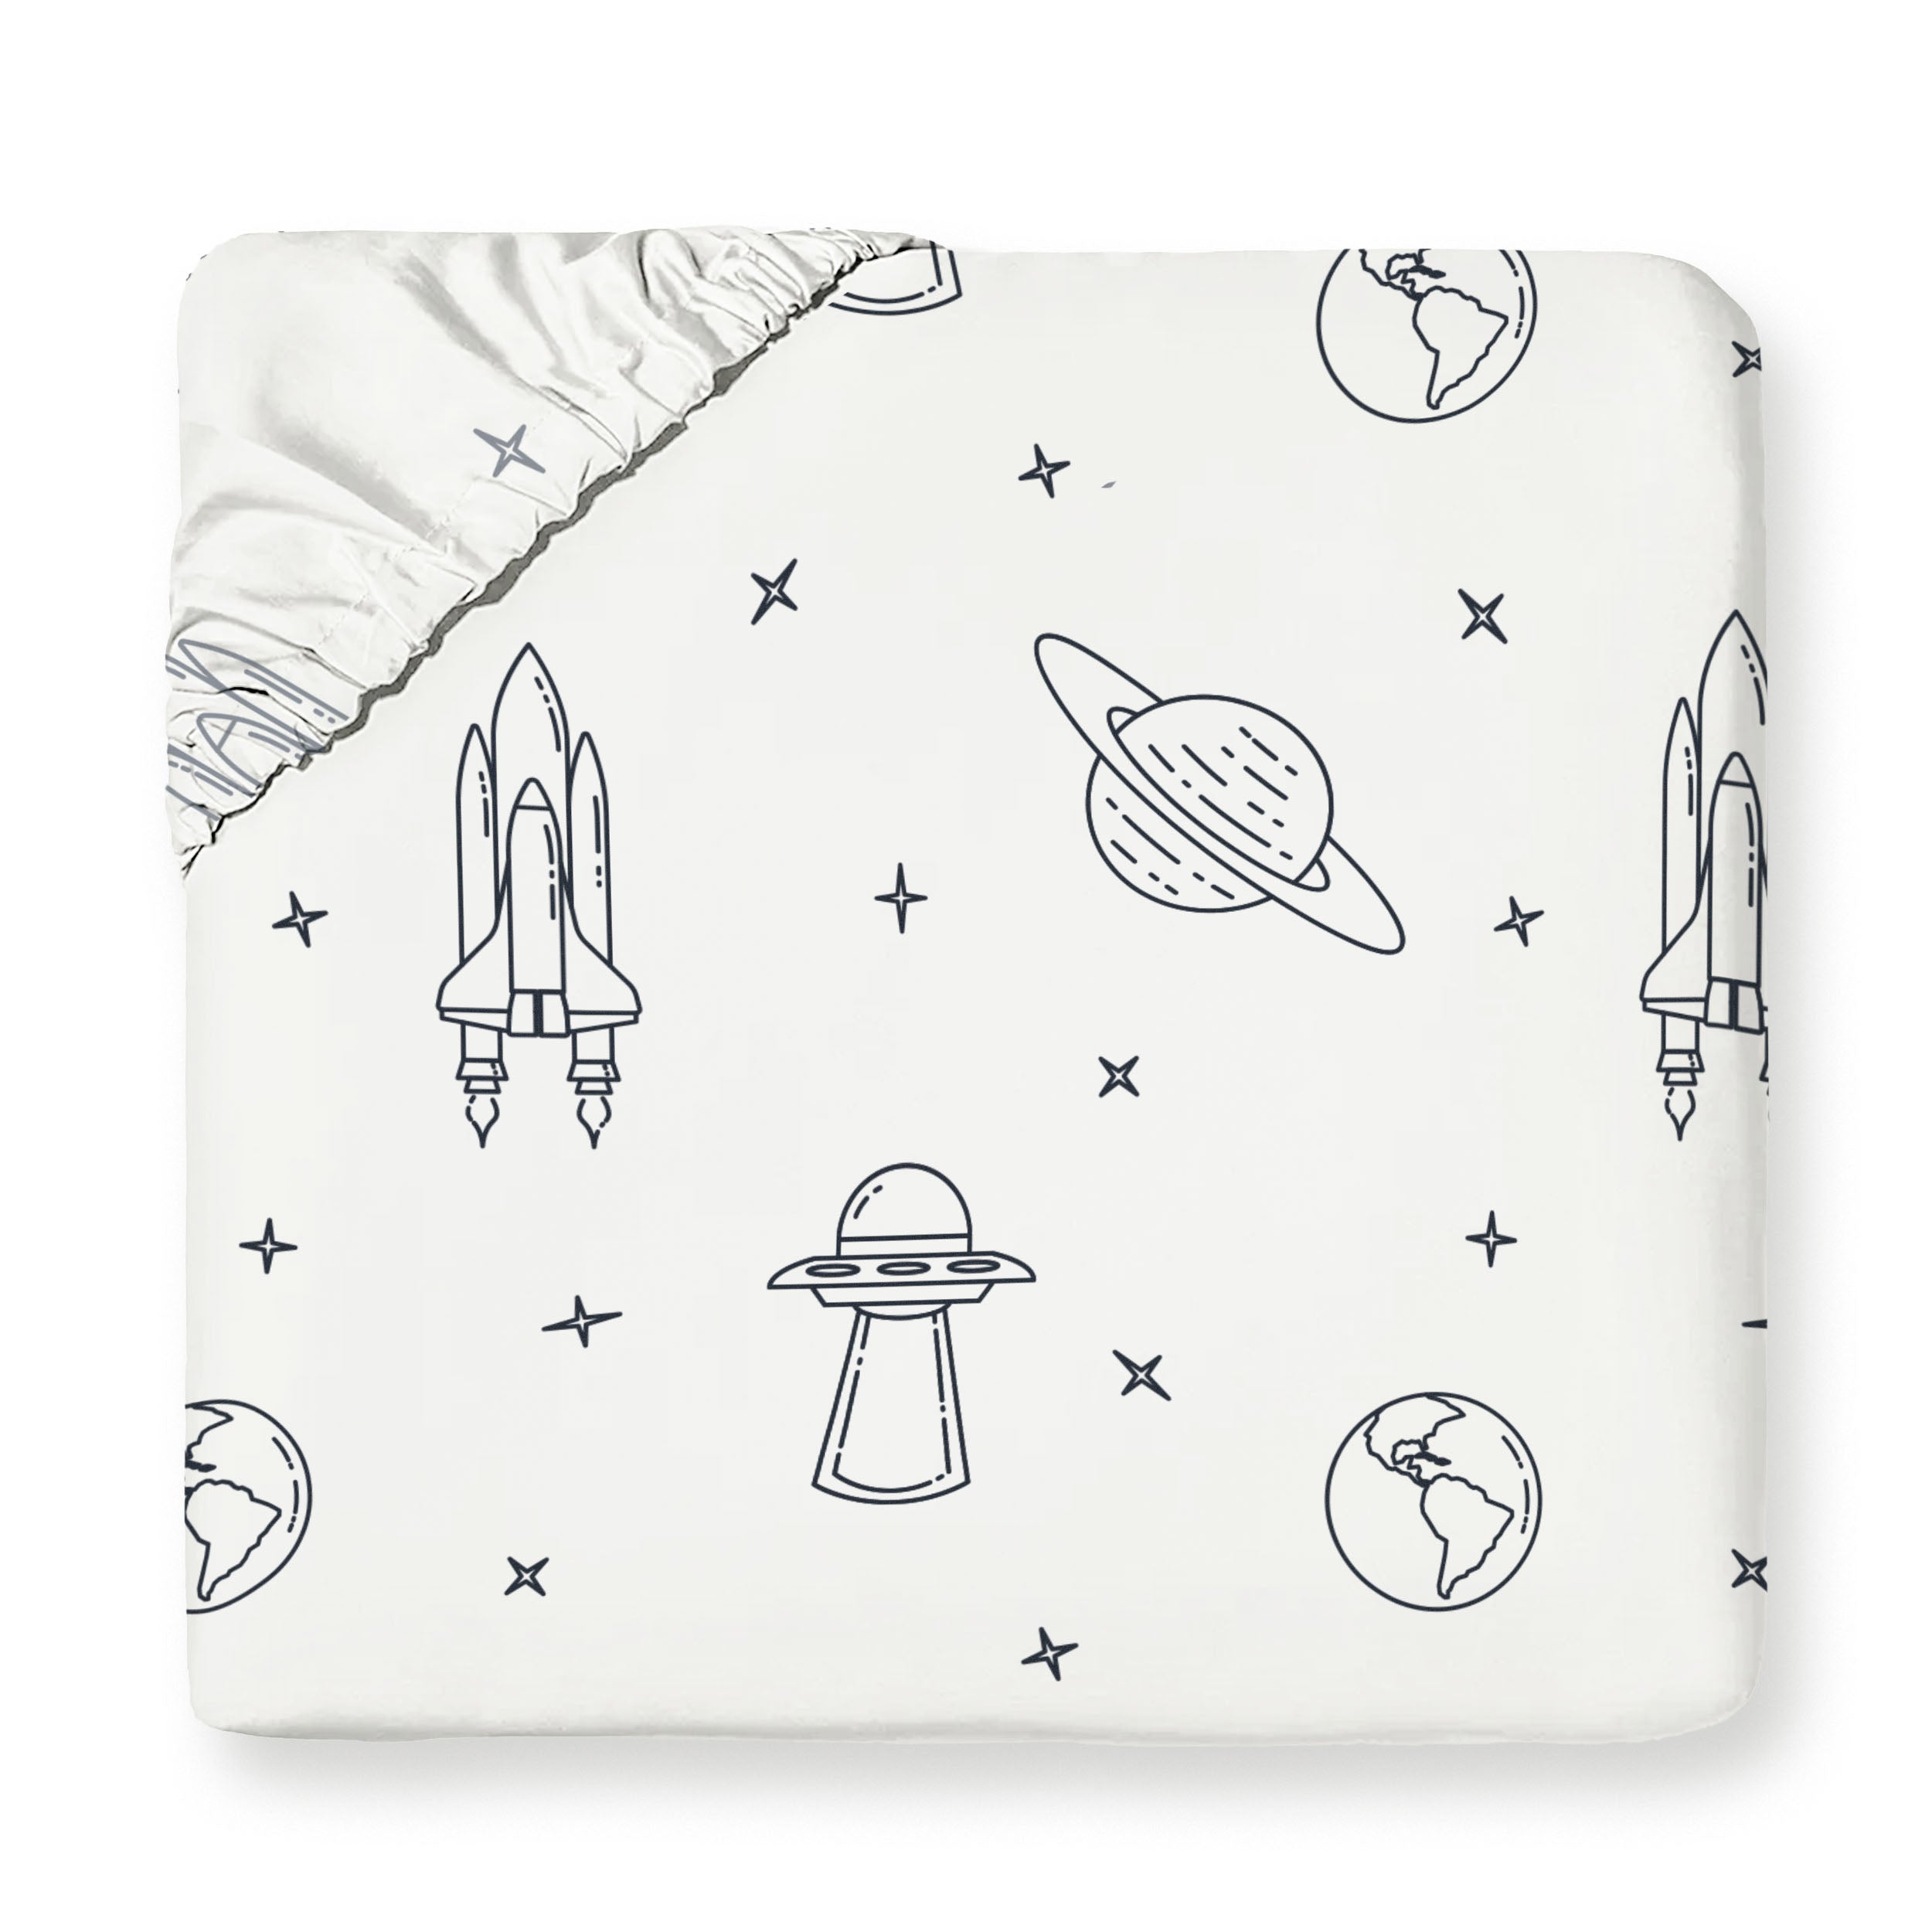 A white baby blanket with a Celestial-themed pattern featuring rockets, planets, stars, and ufos, partially folded to show a silver satin edge by Makemake Organics.